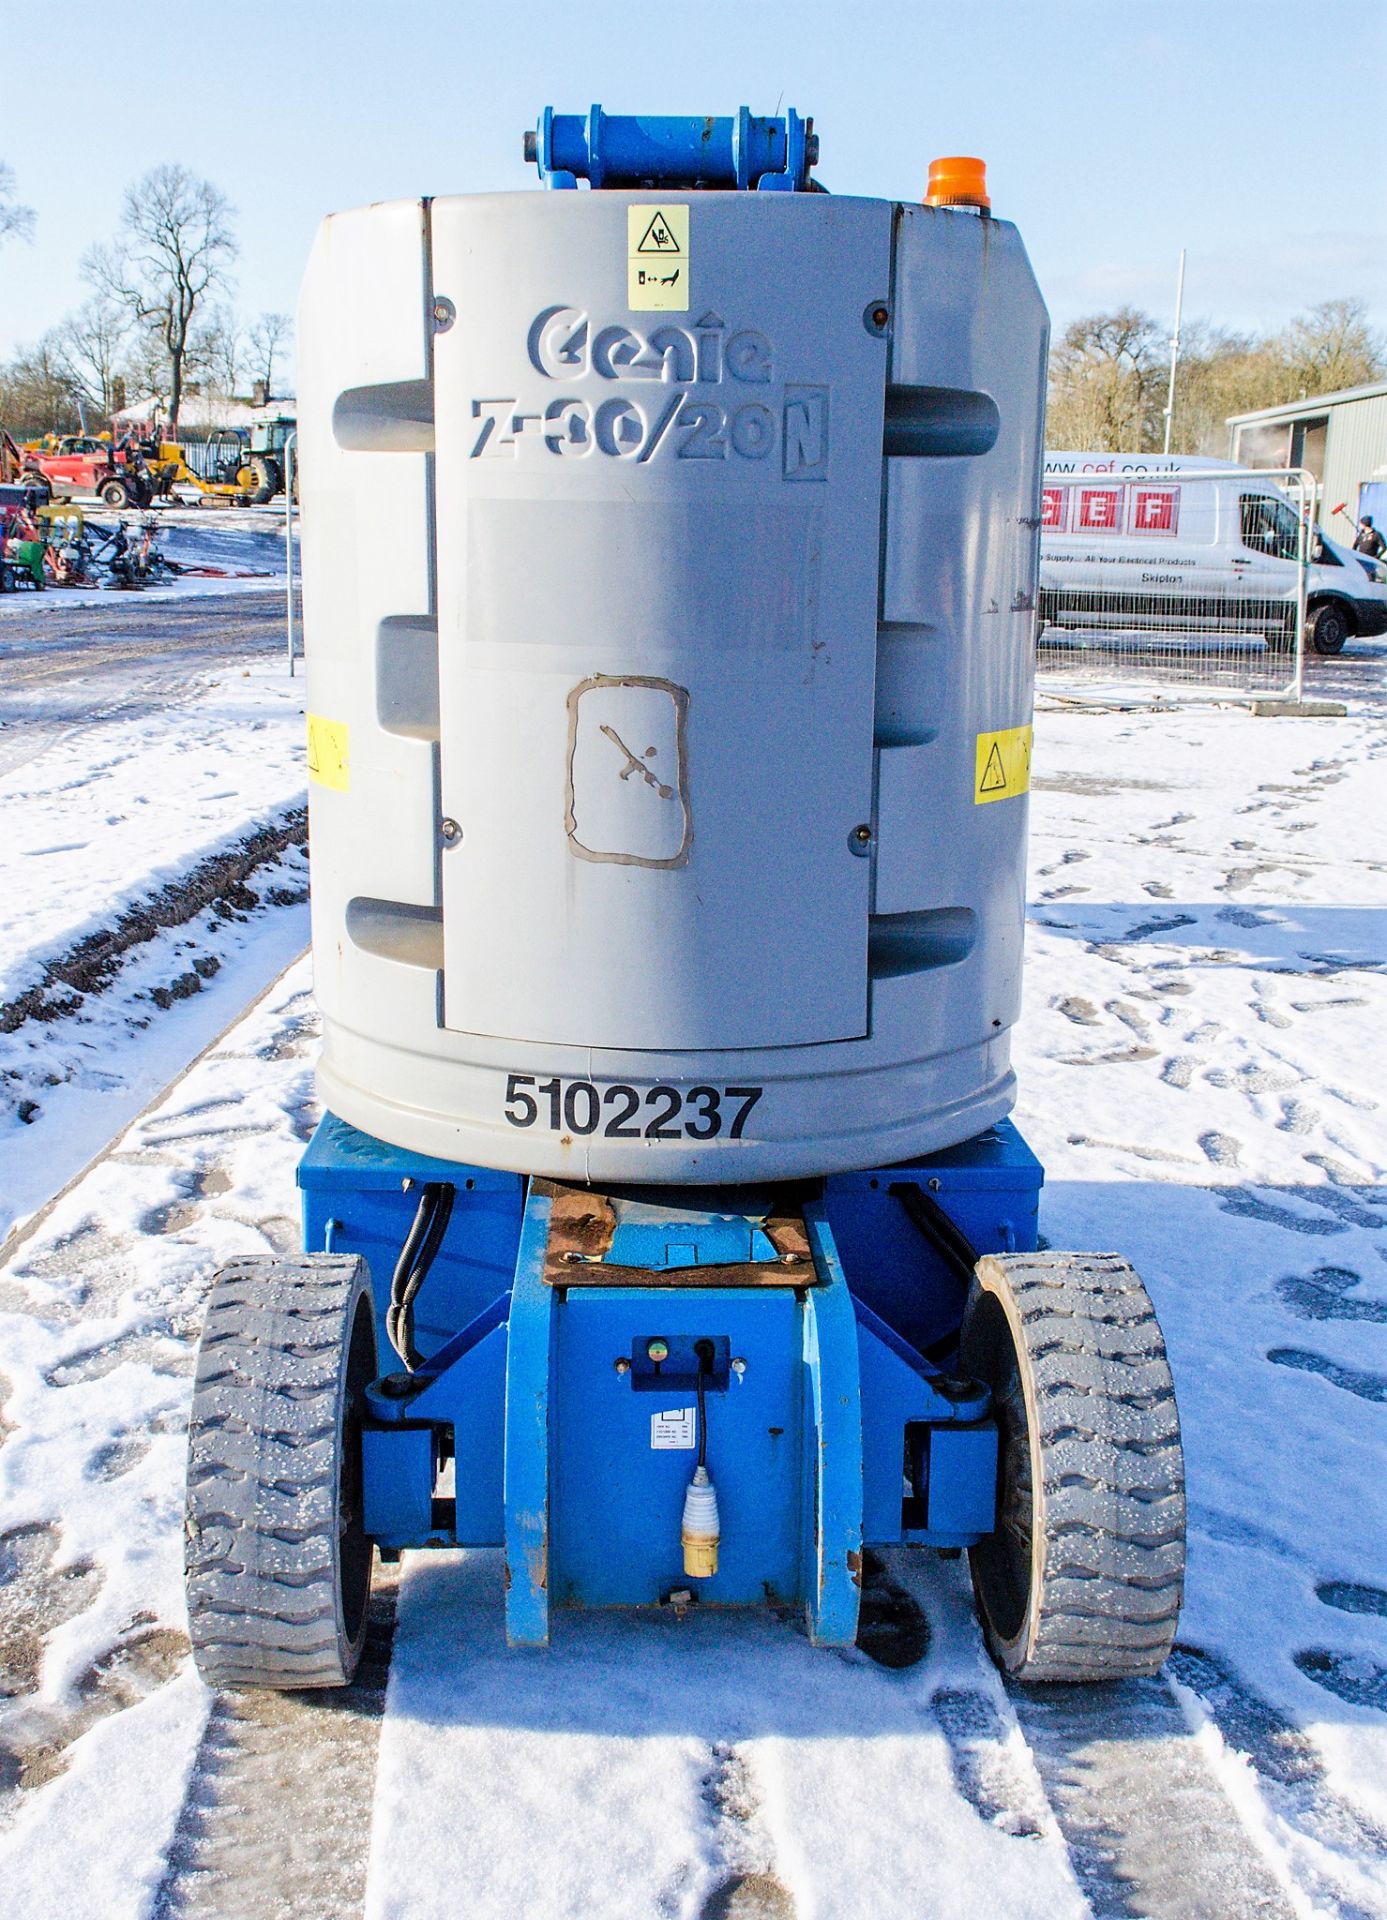 Genie Z-30/20 battery electric boom lift access platform Year: 2014 S/N: 15393 Recorded Hours: 189 - Image 6 of 15